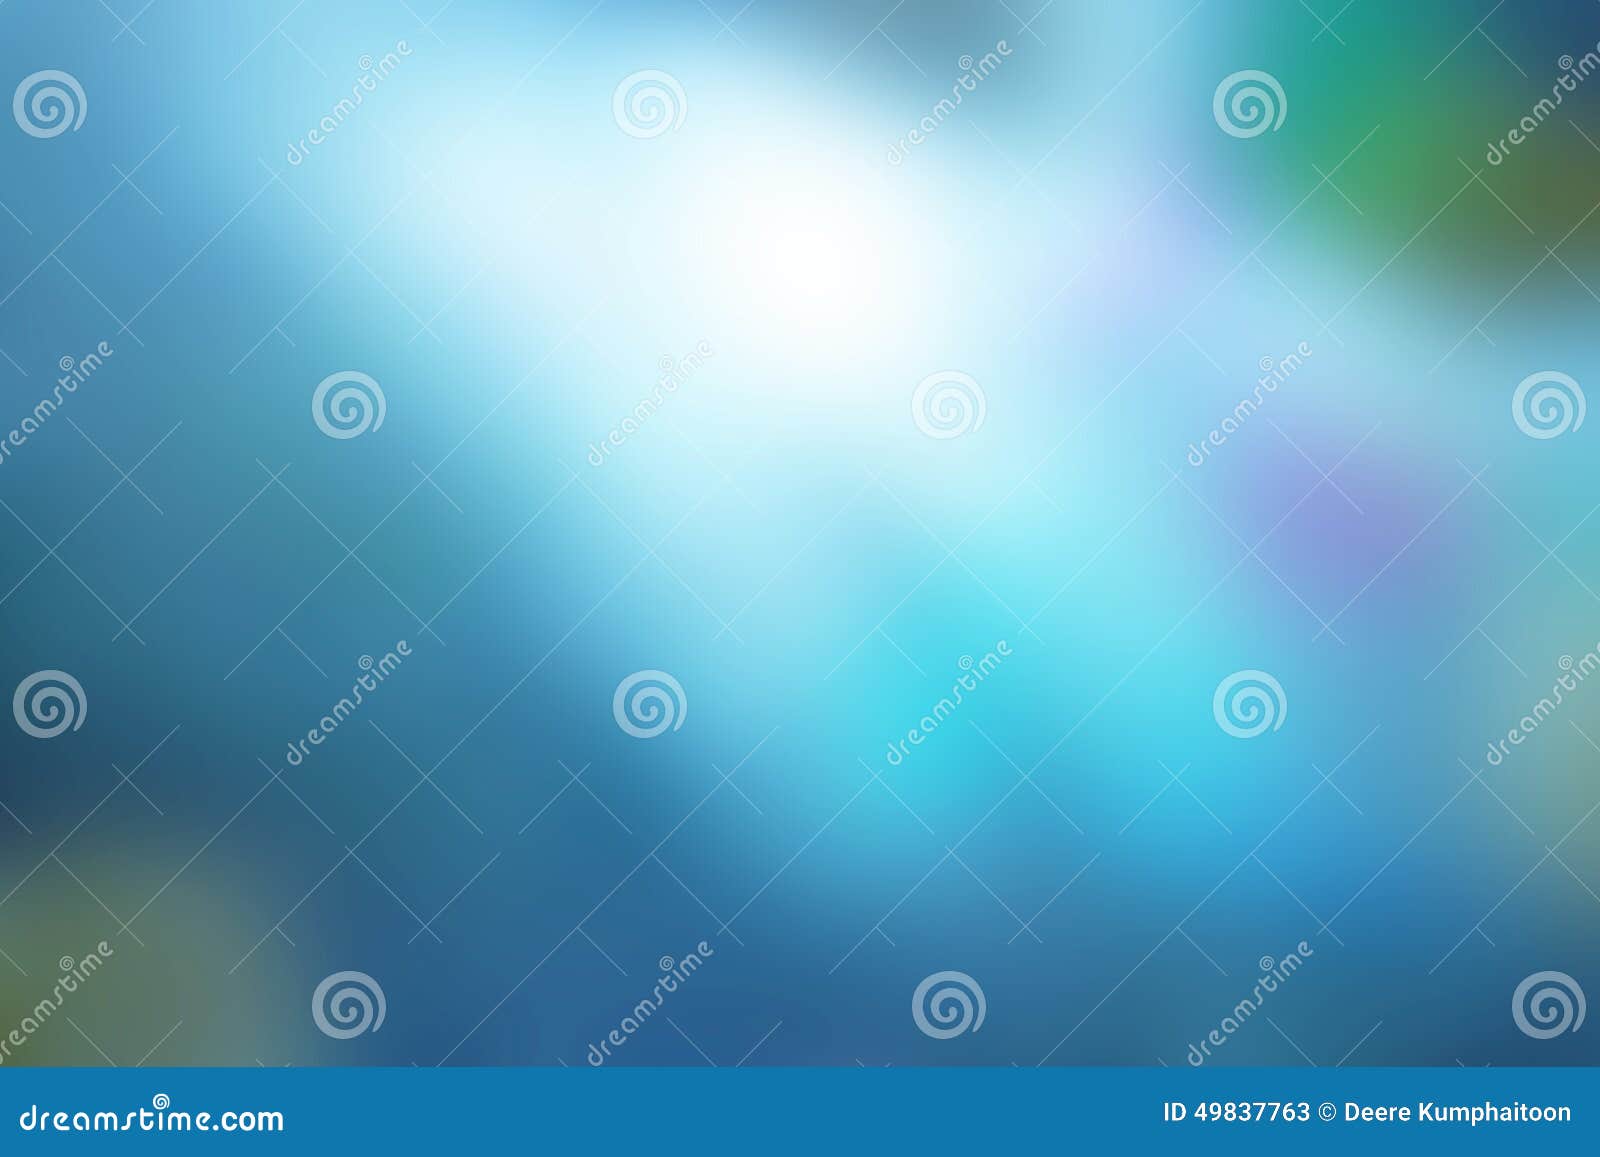 Blur blue background stock image. Image of colourful - 49837763